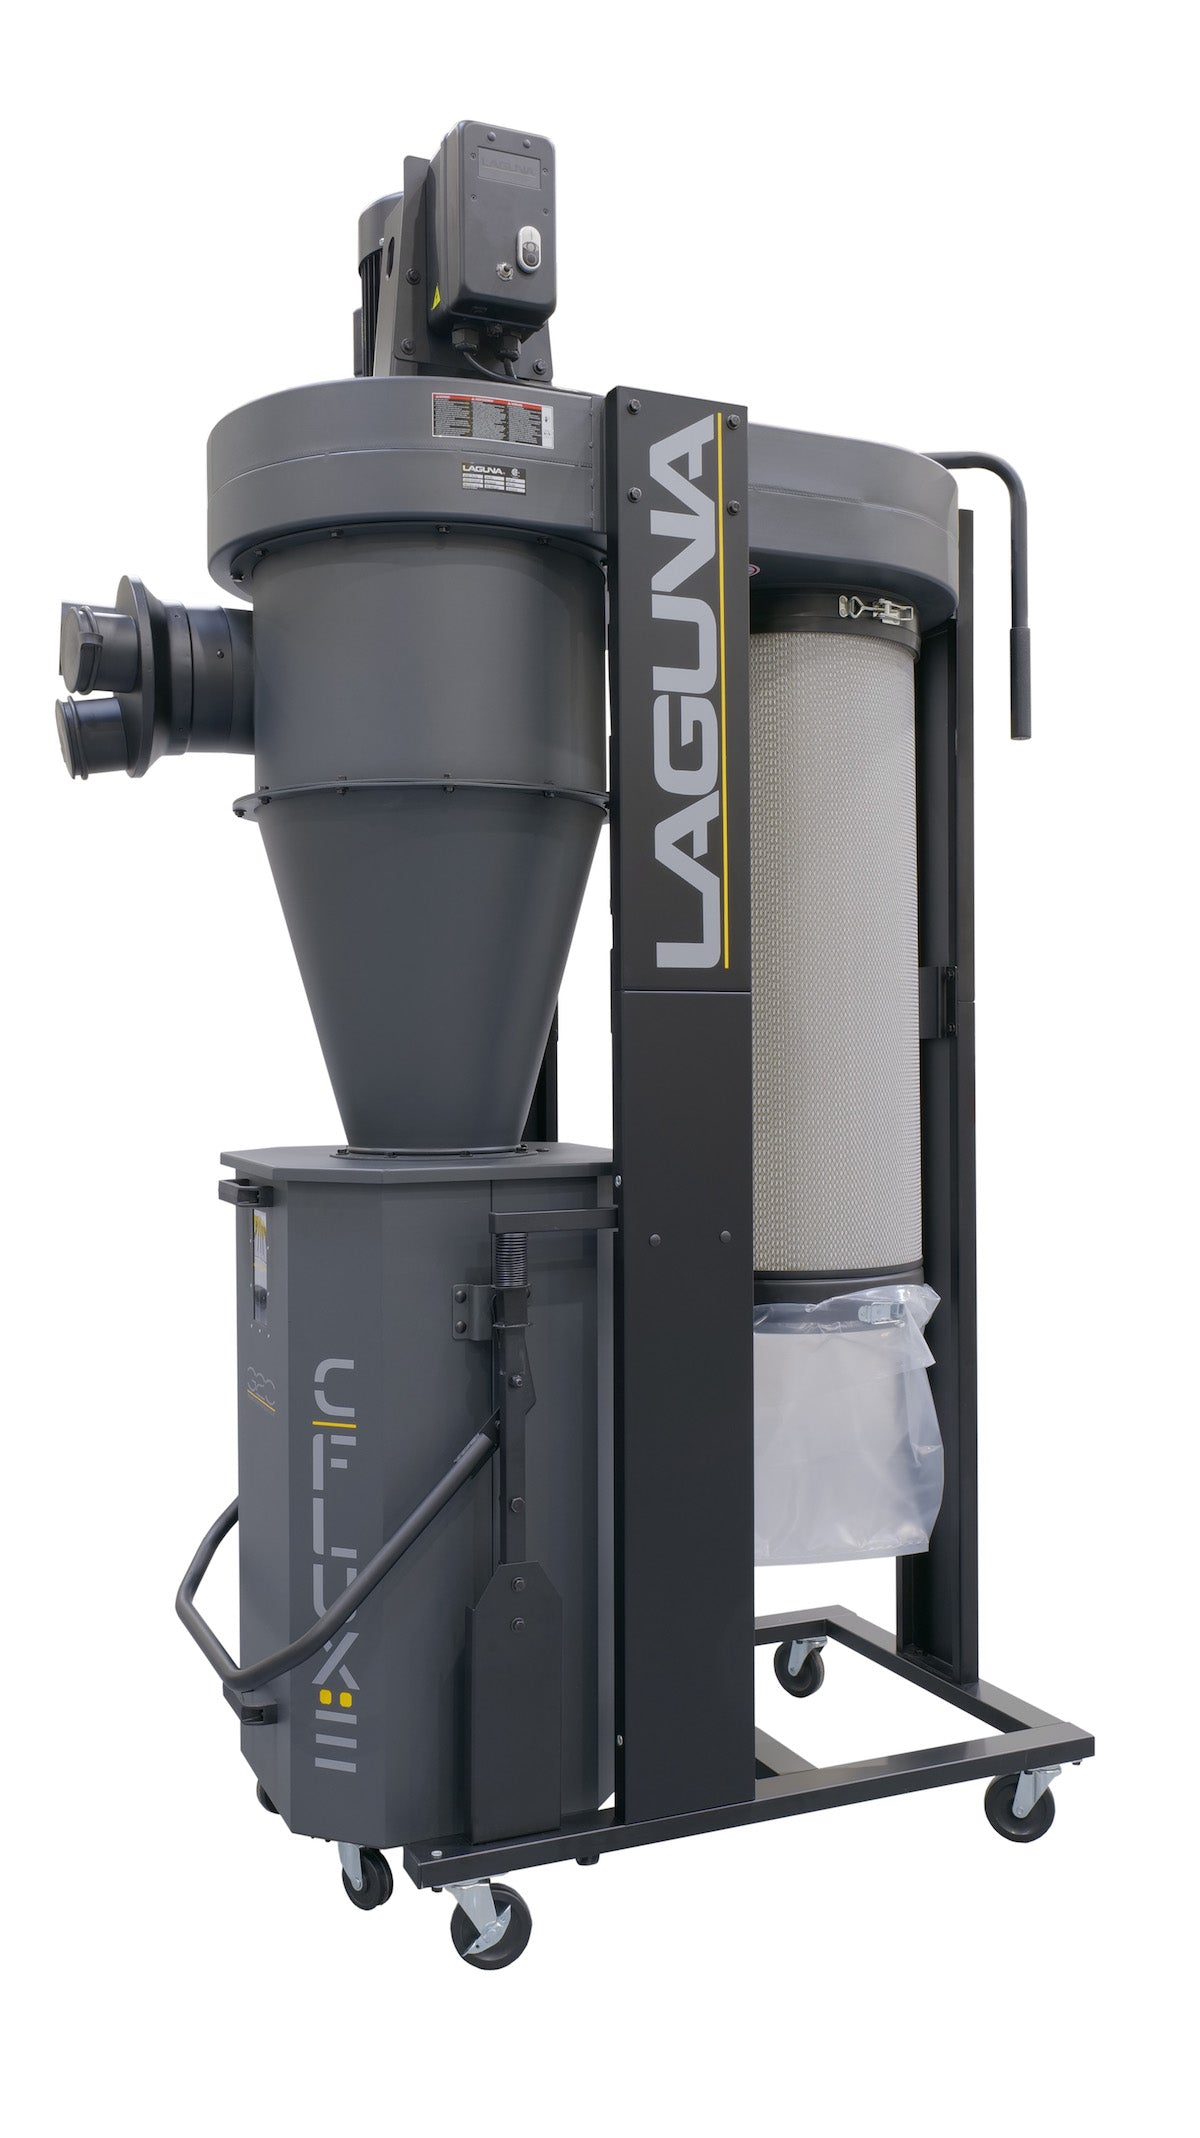 C|FLUX3, 3HP Cyclone Dust Collector, Laguna Tools, 3HP, 220V, 1 PH, CSA Certified